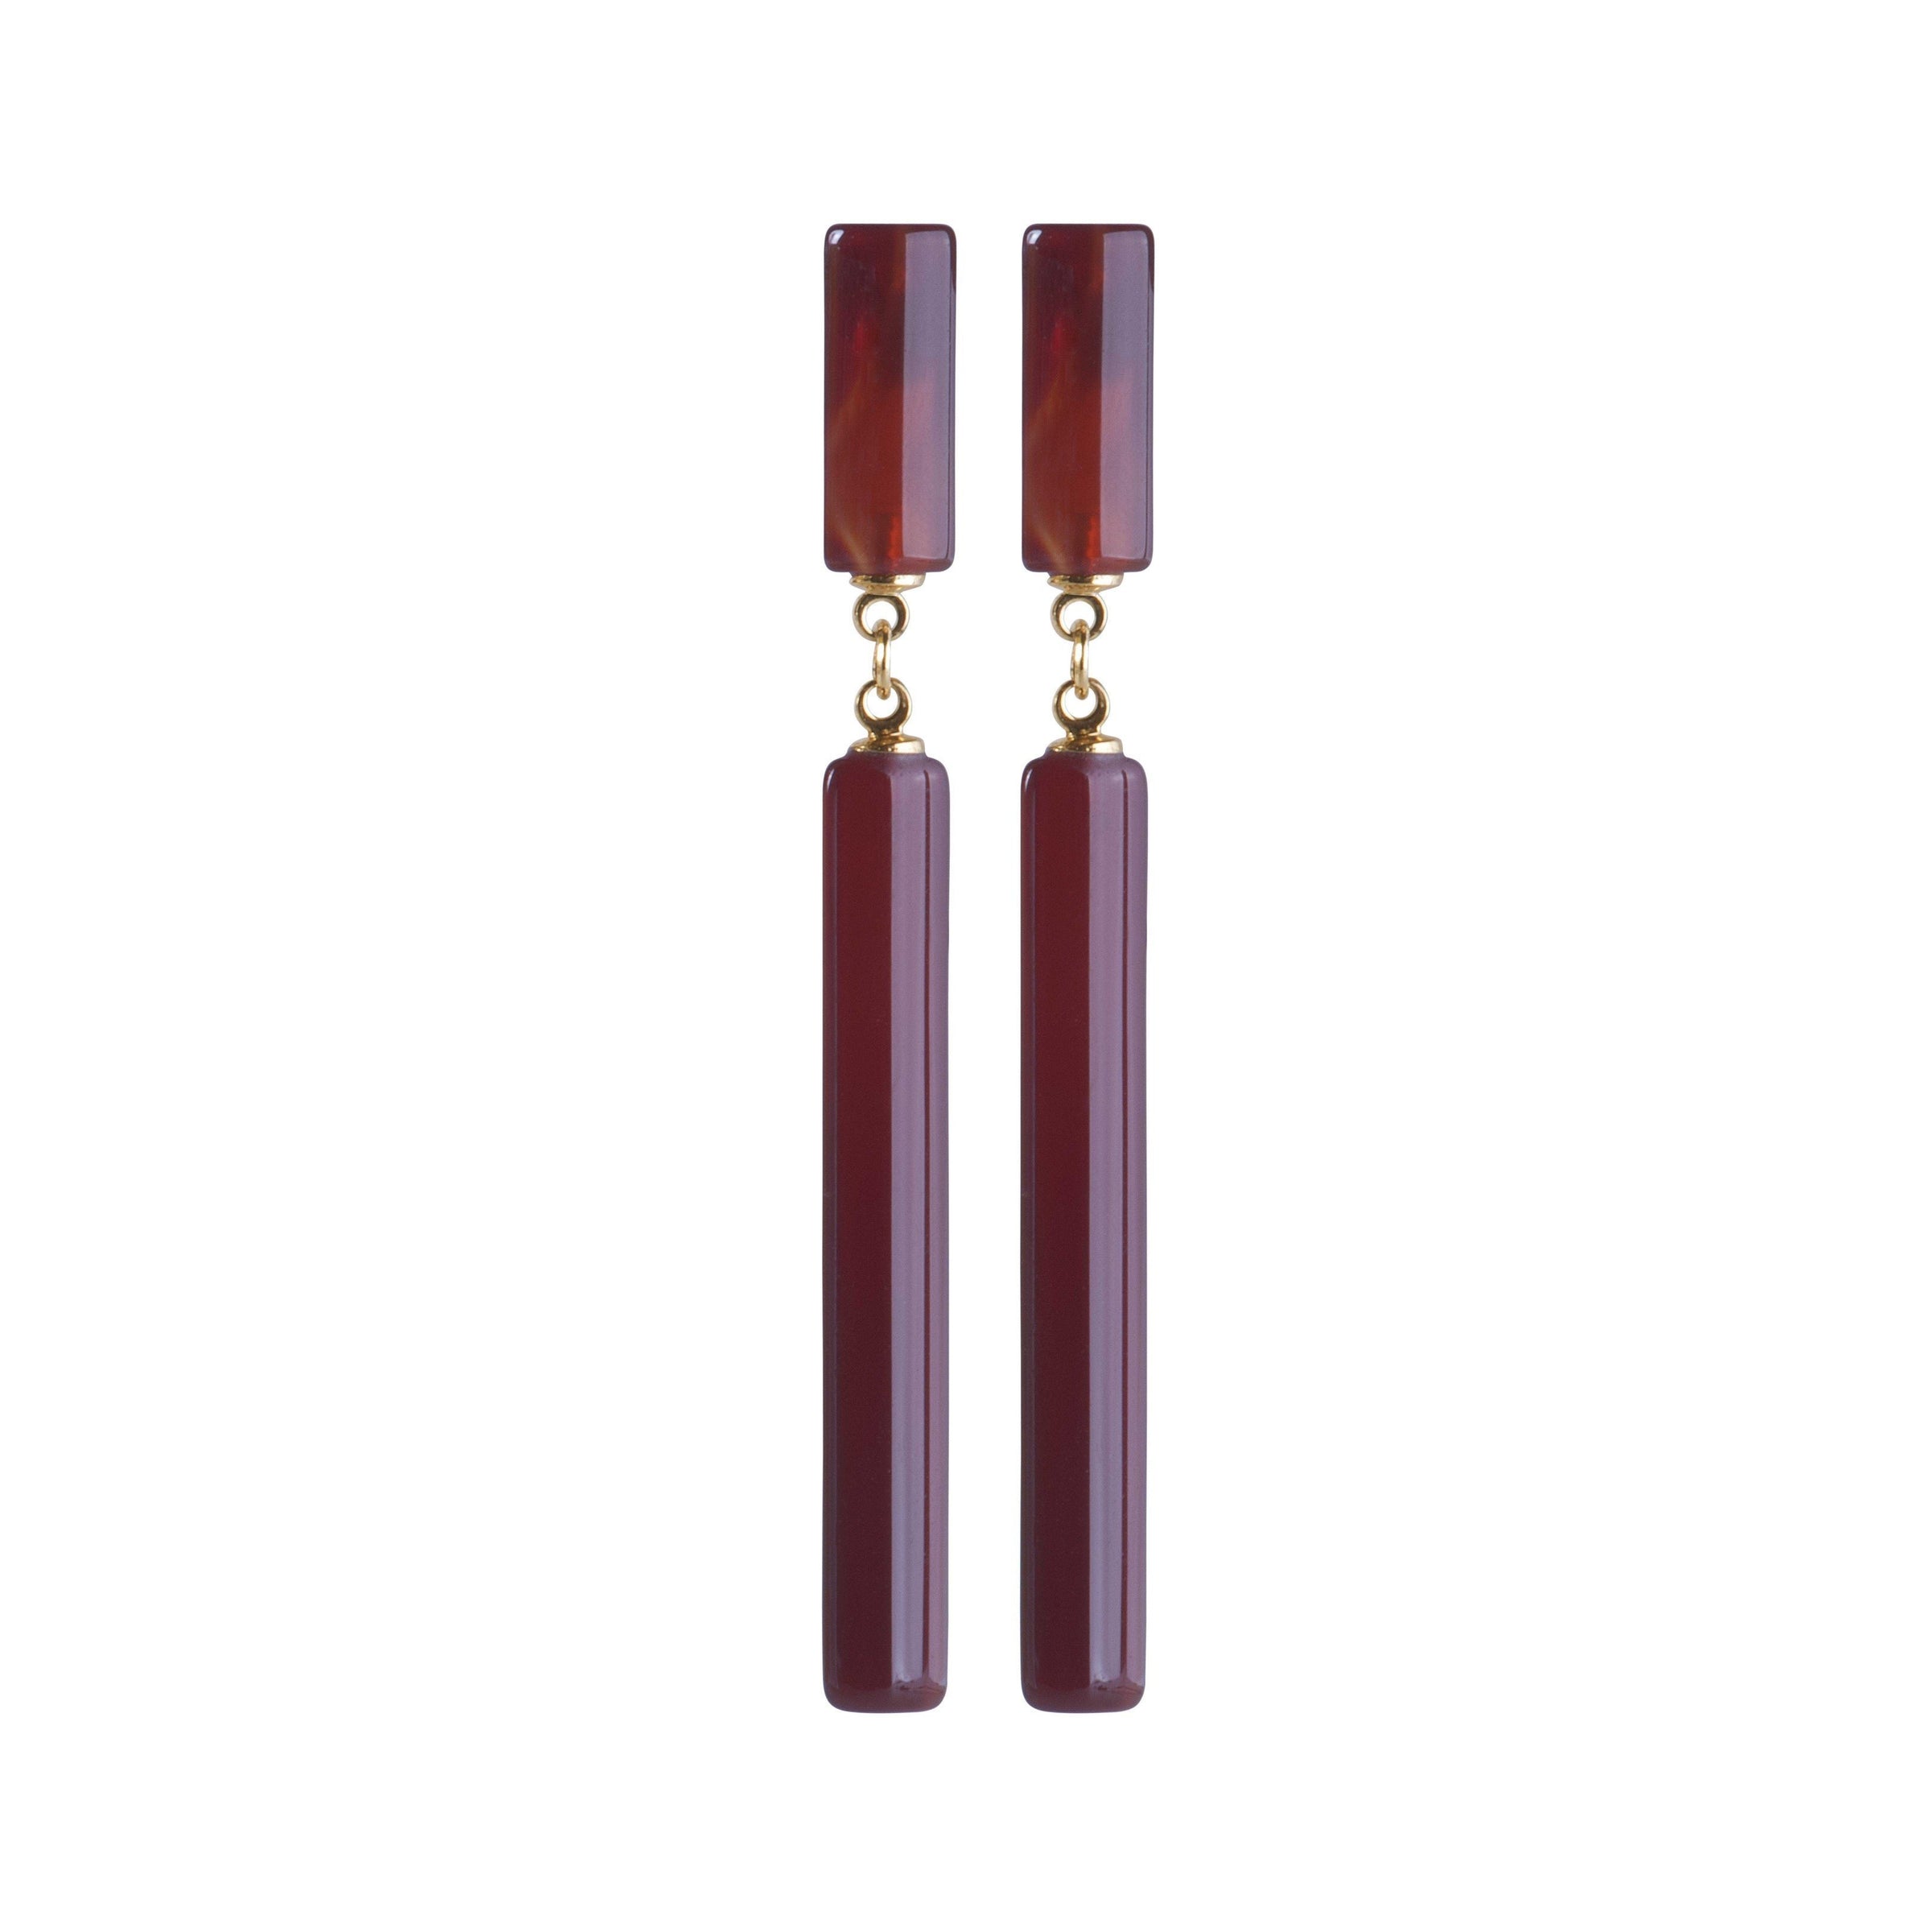 Thin Agate Stone Earrings with Gold-Plated Metals